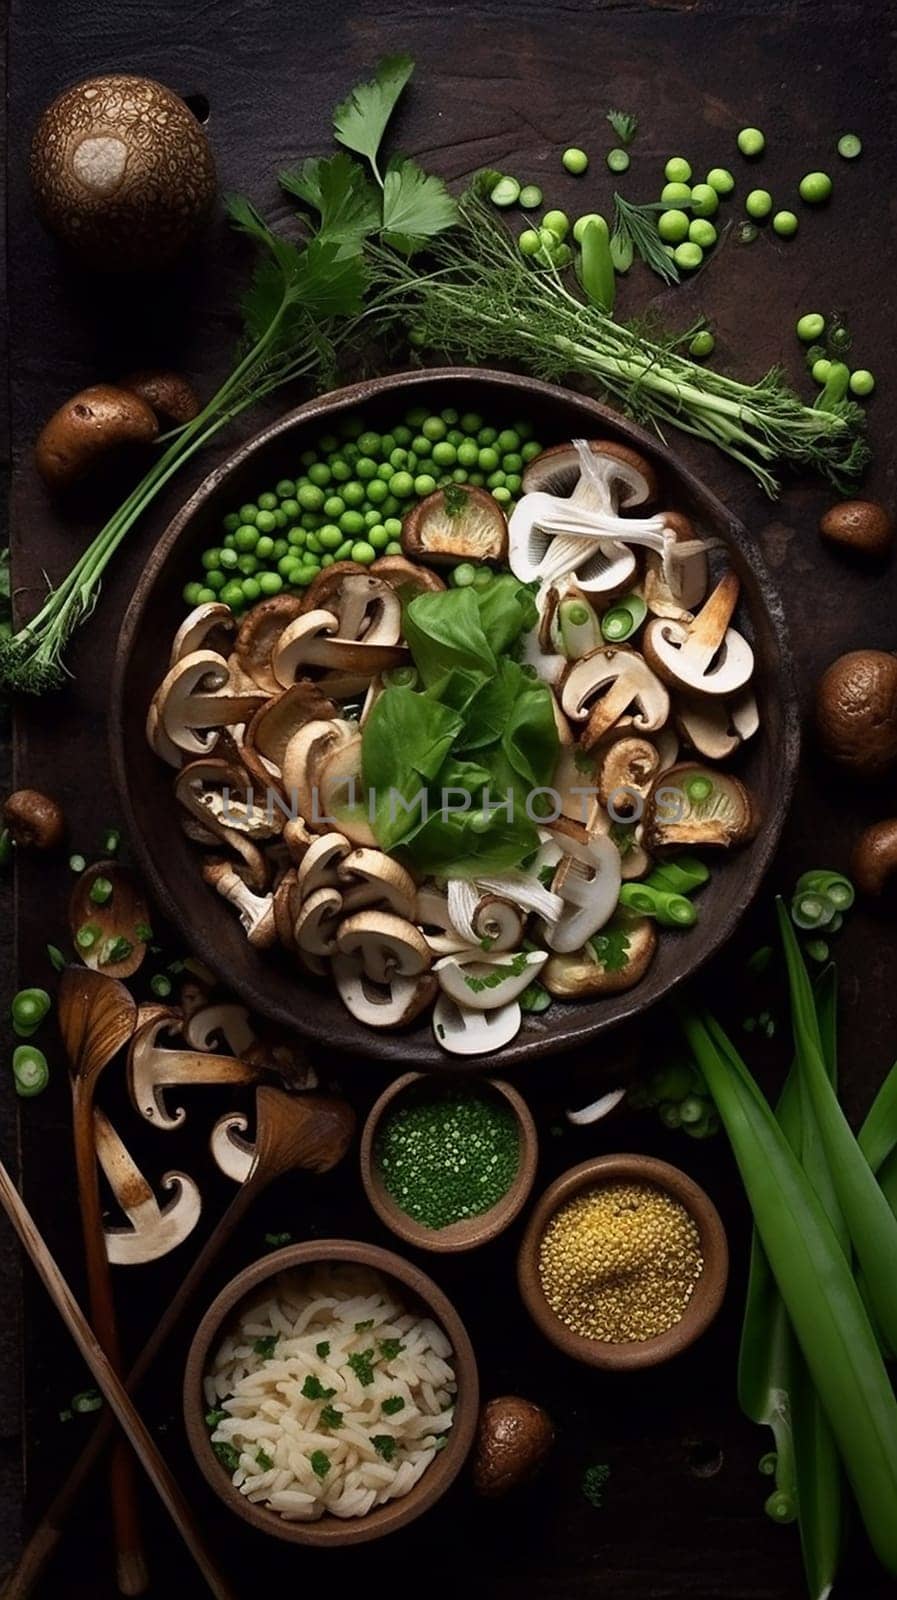 Assorted fresh vegetables and herbs arranged artfully on a dark background.